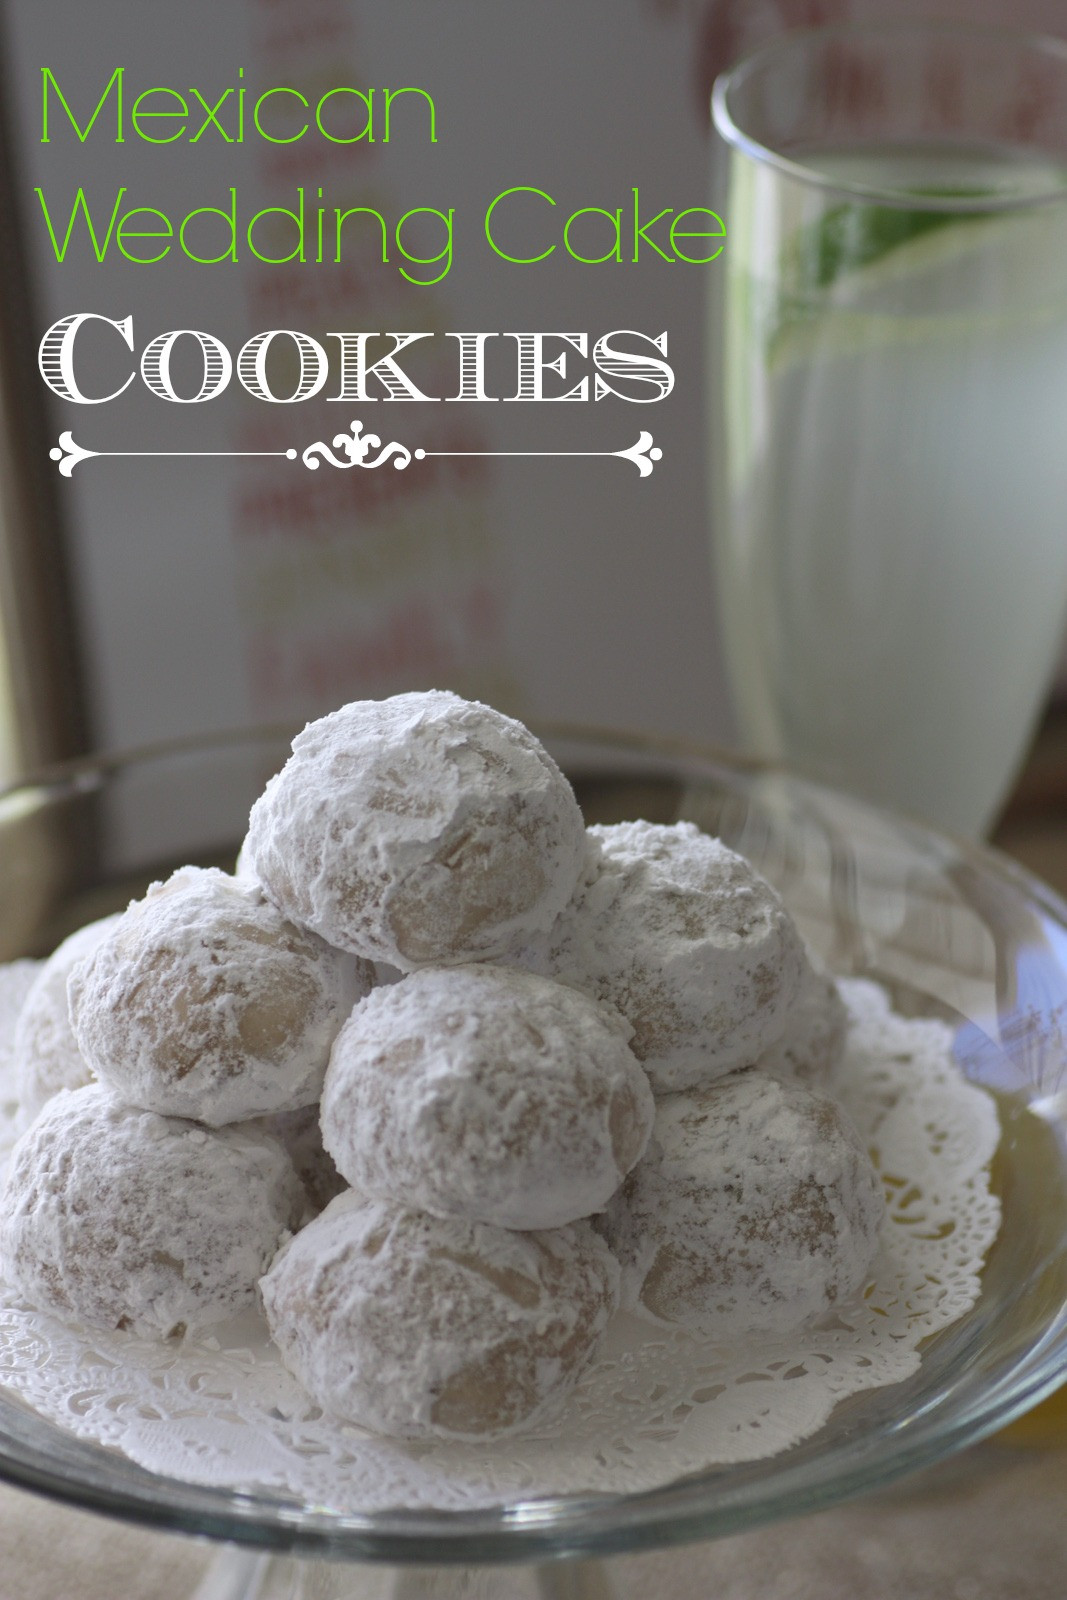 Our Most Shared Wedding Cake Cookies Recipe
 Ever